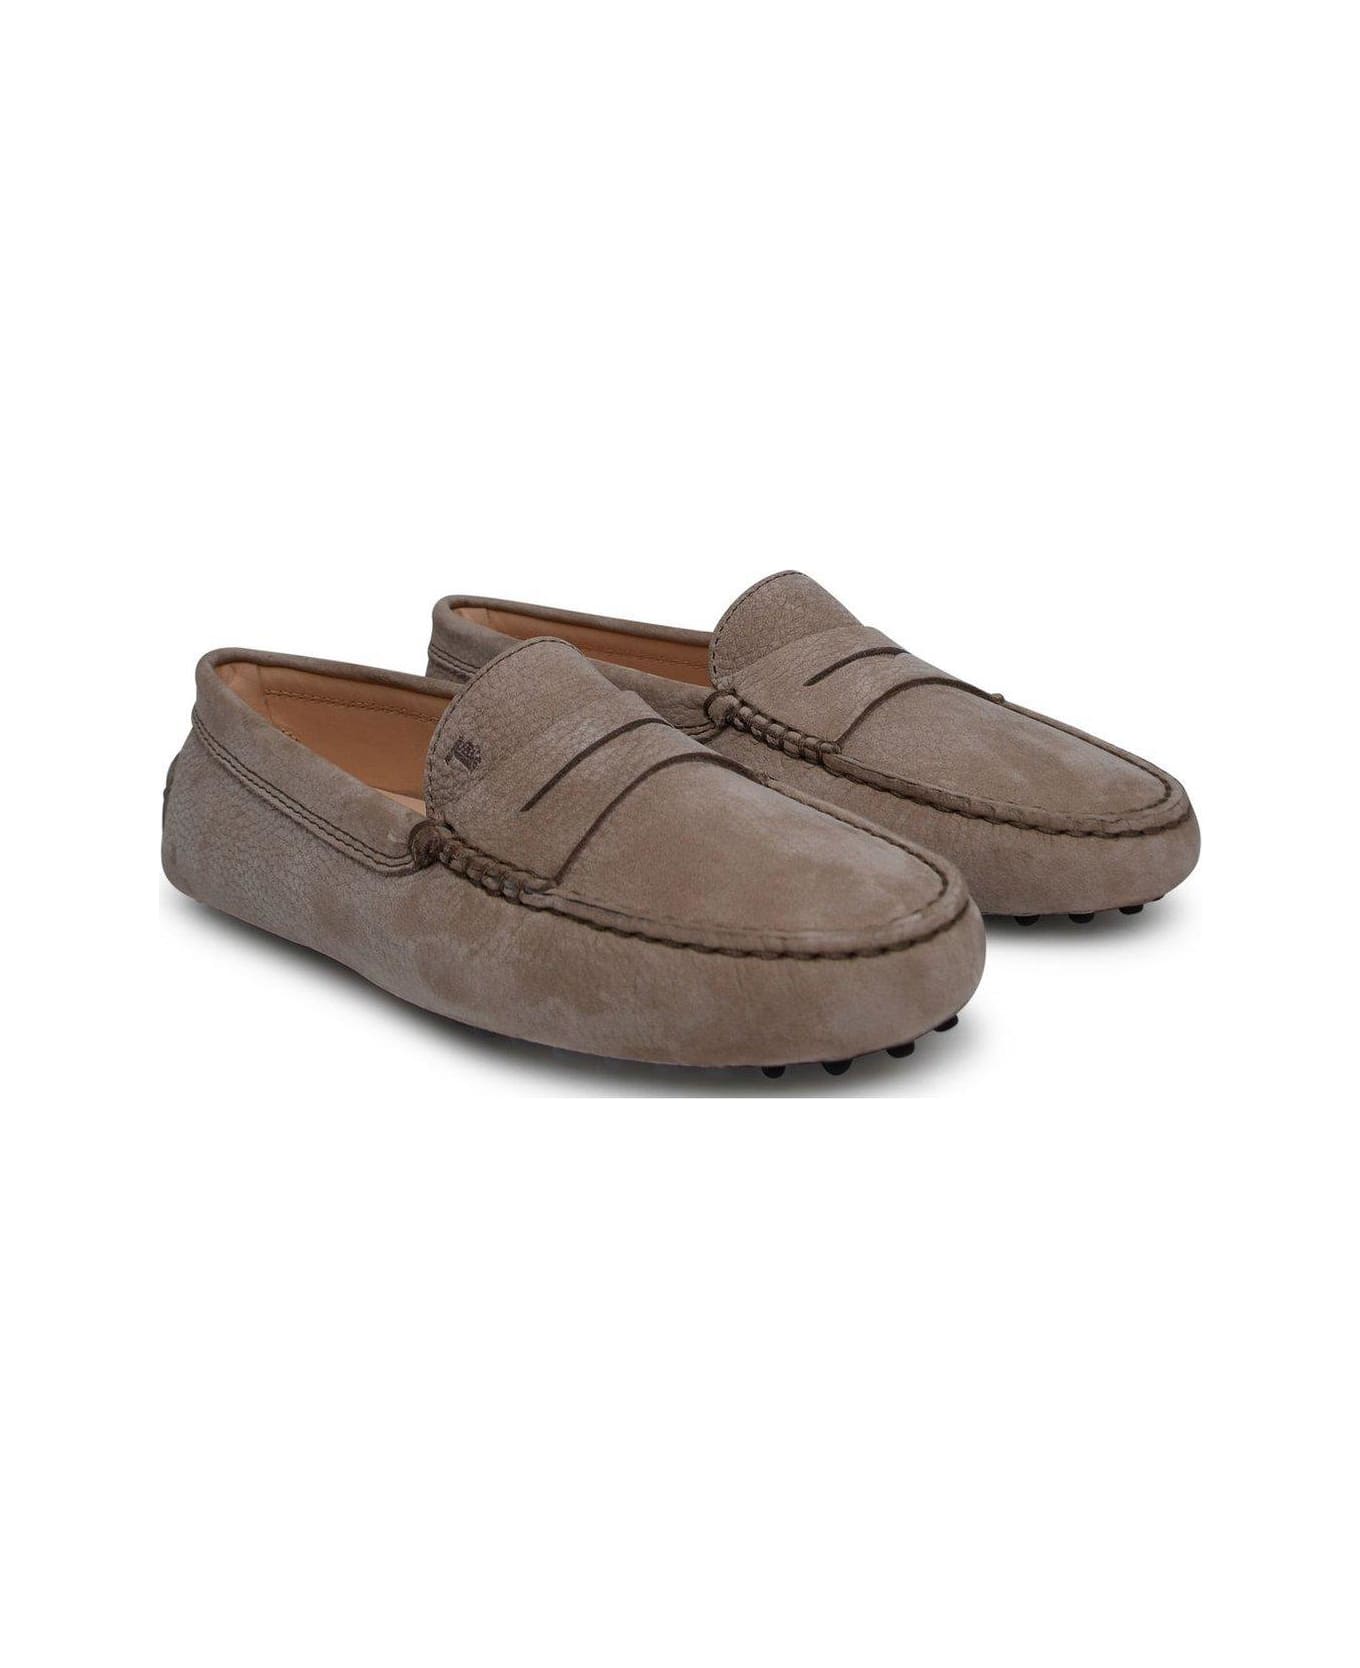 Tod's Gommino Almond Toe Loafers - BEIGE フラットシューズ